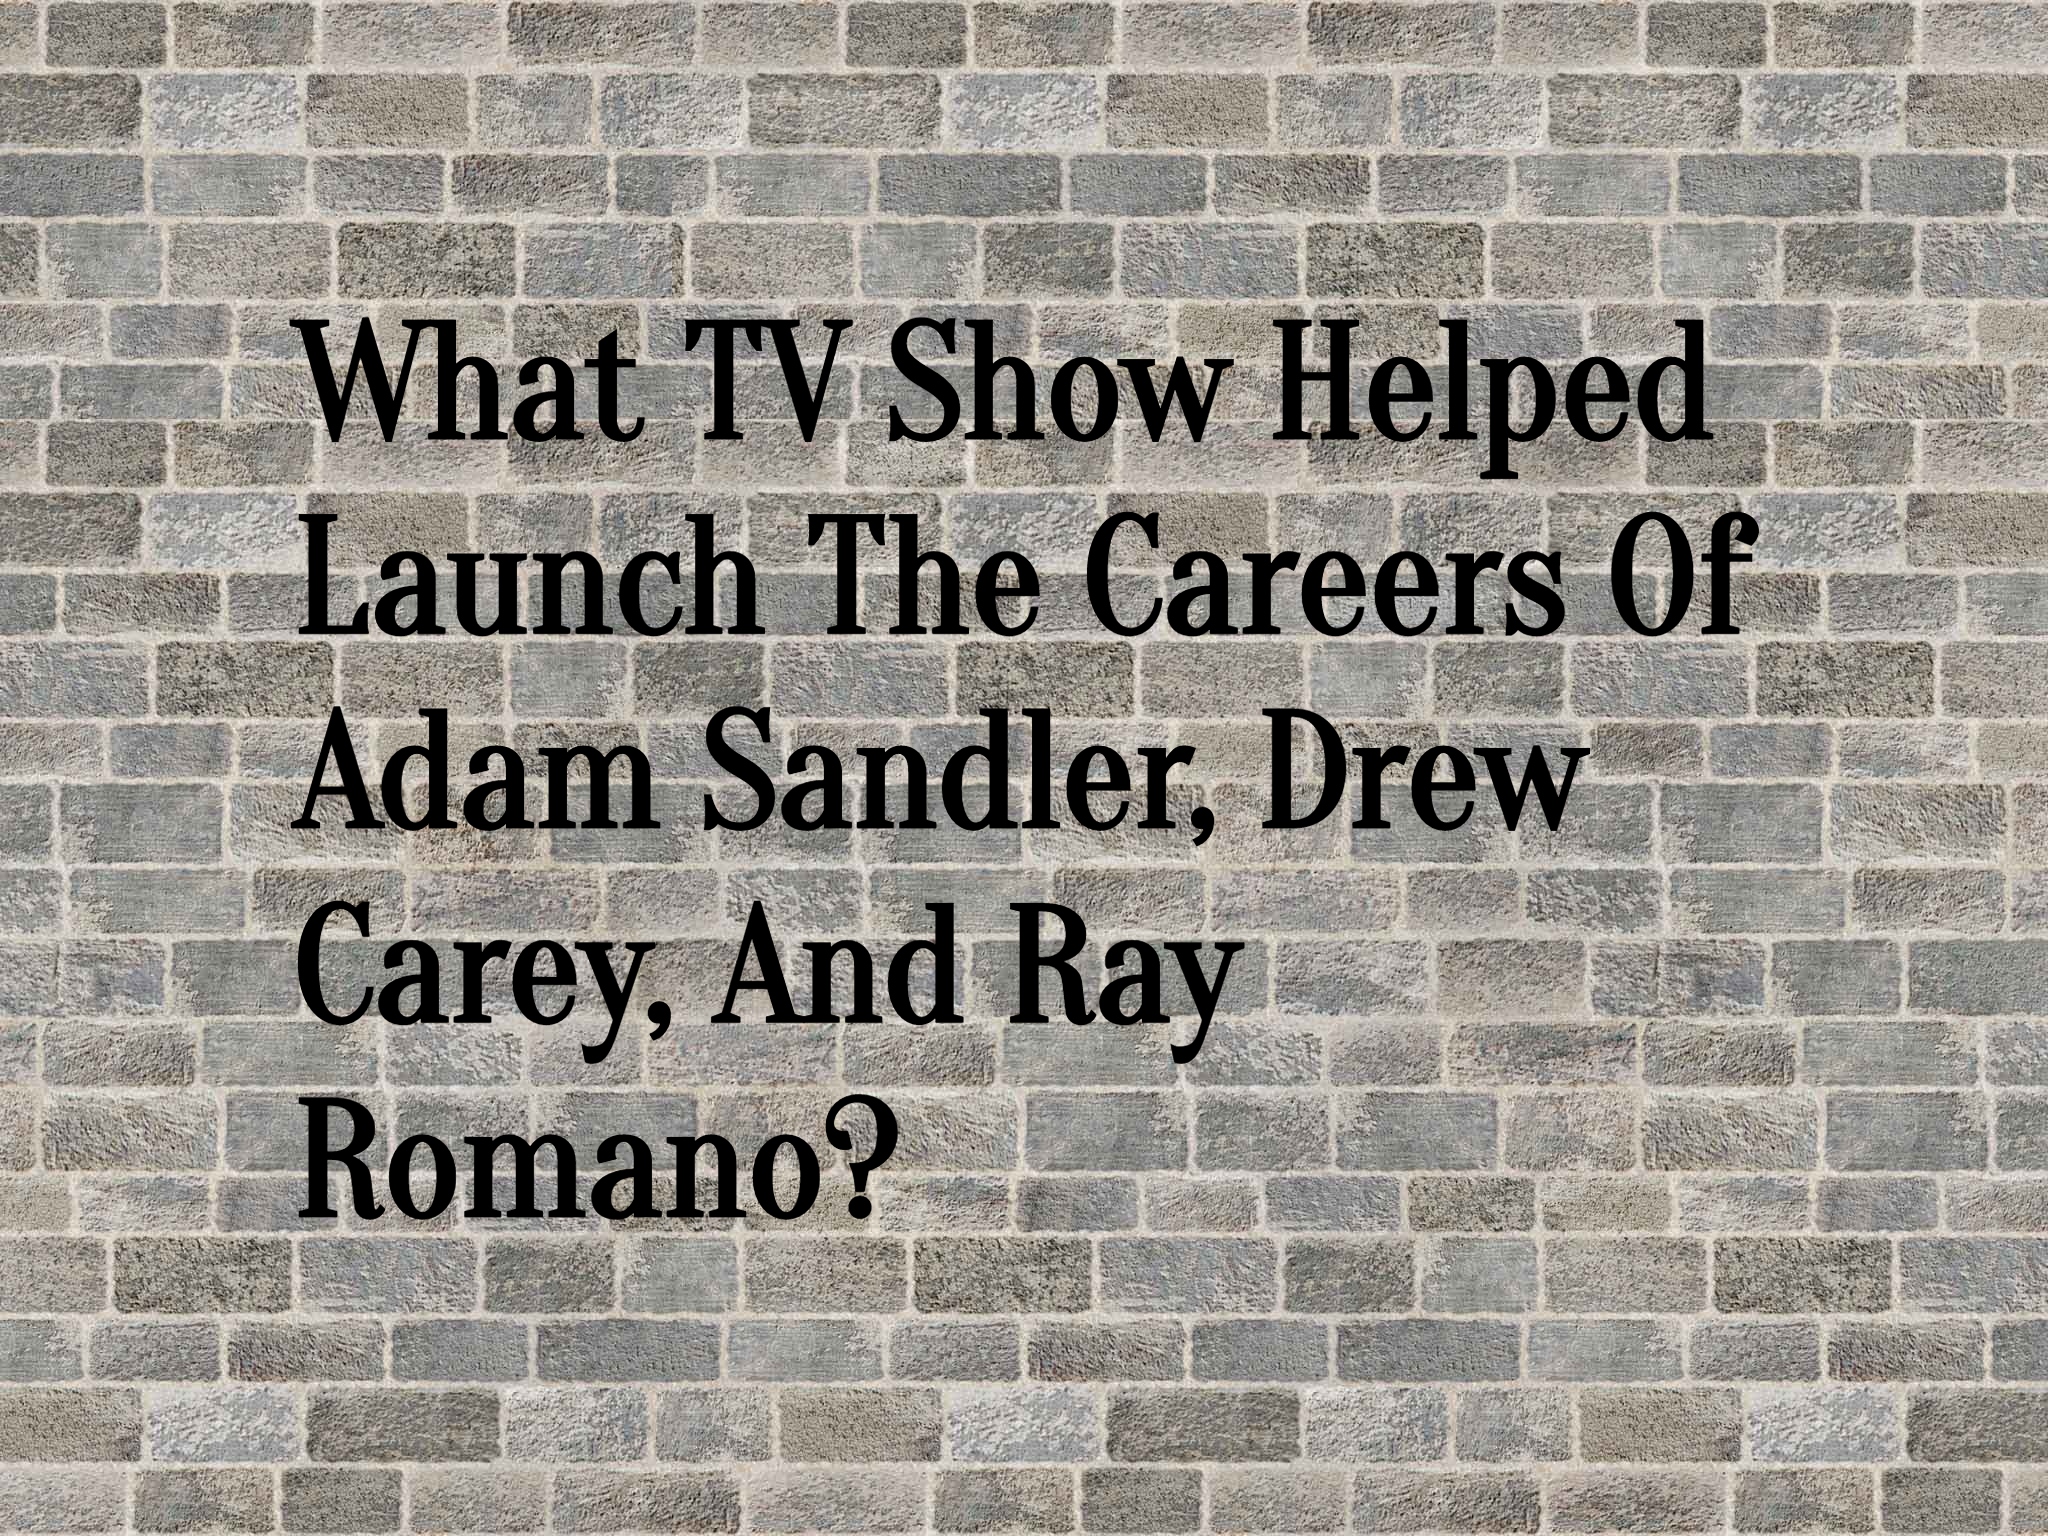 What TV Show Helped Launch The Careers Of Adam Sandler, Drew Carey, And Ray Romano?